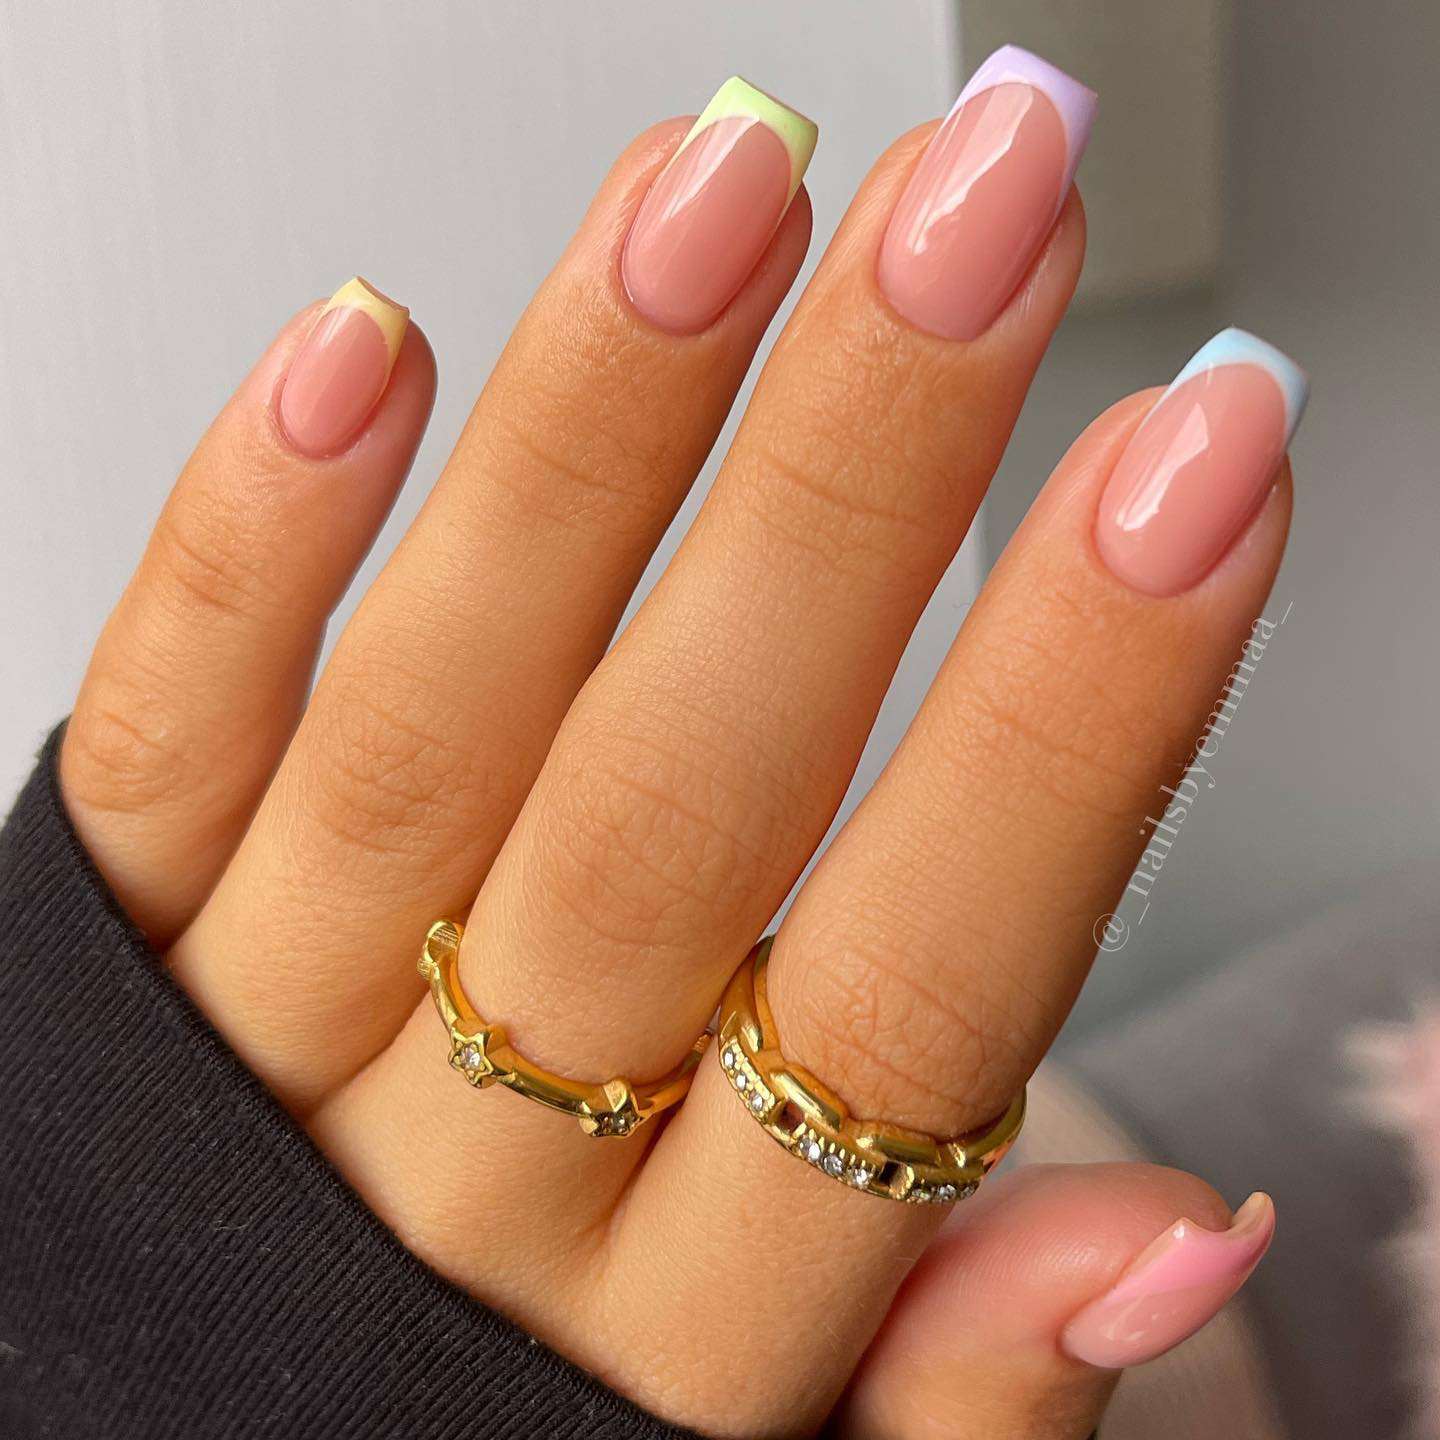 50 Best Nail Designs Trends To Try Out In 2022 images 4